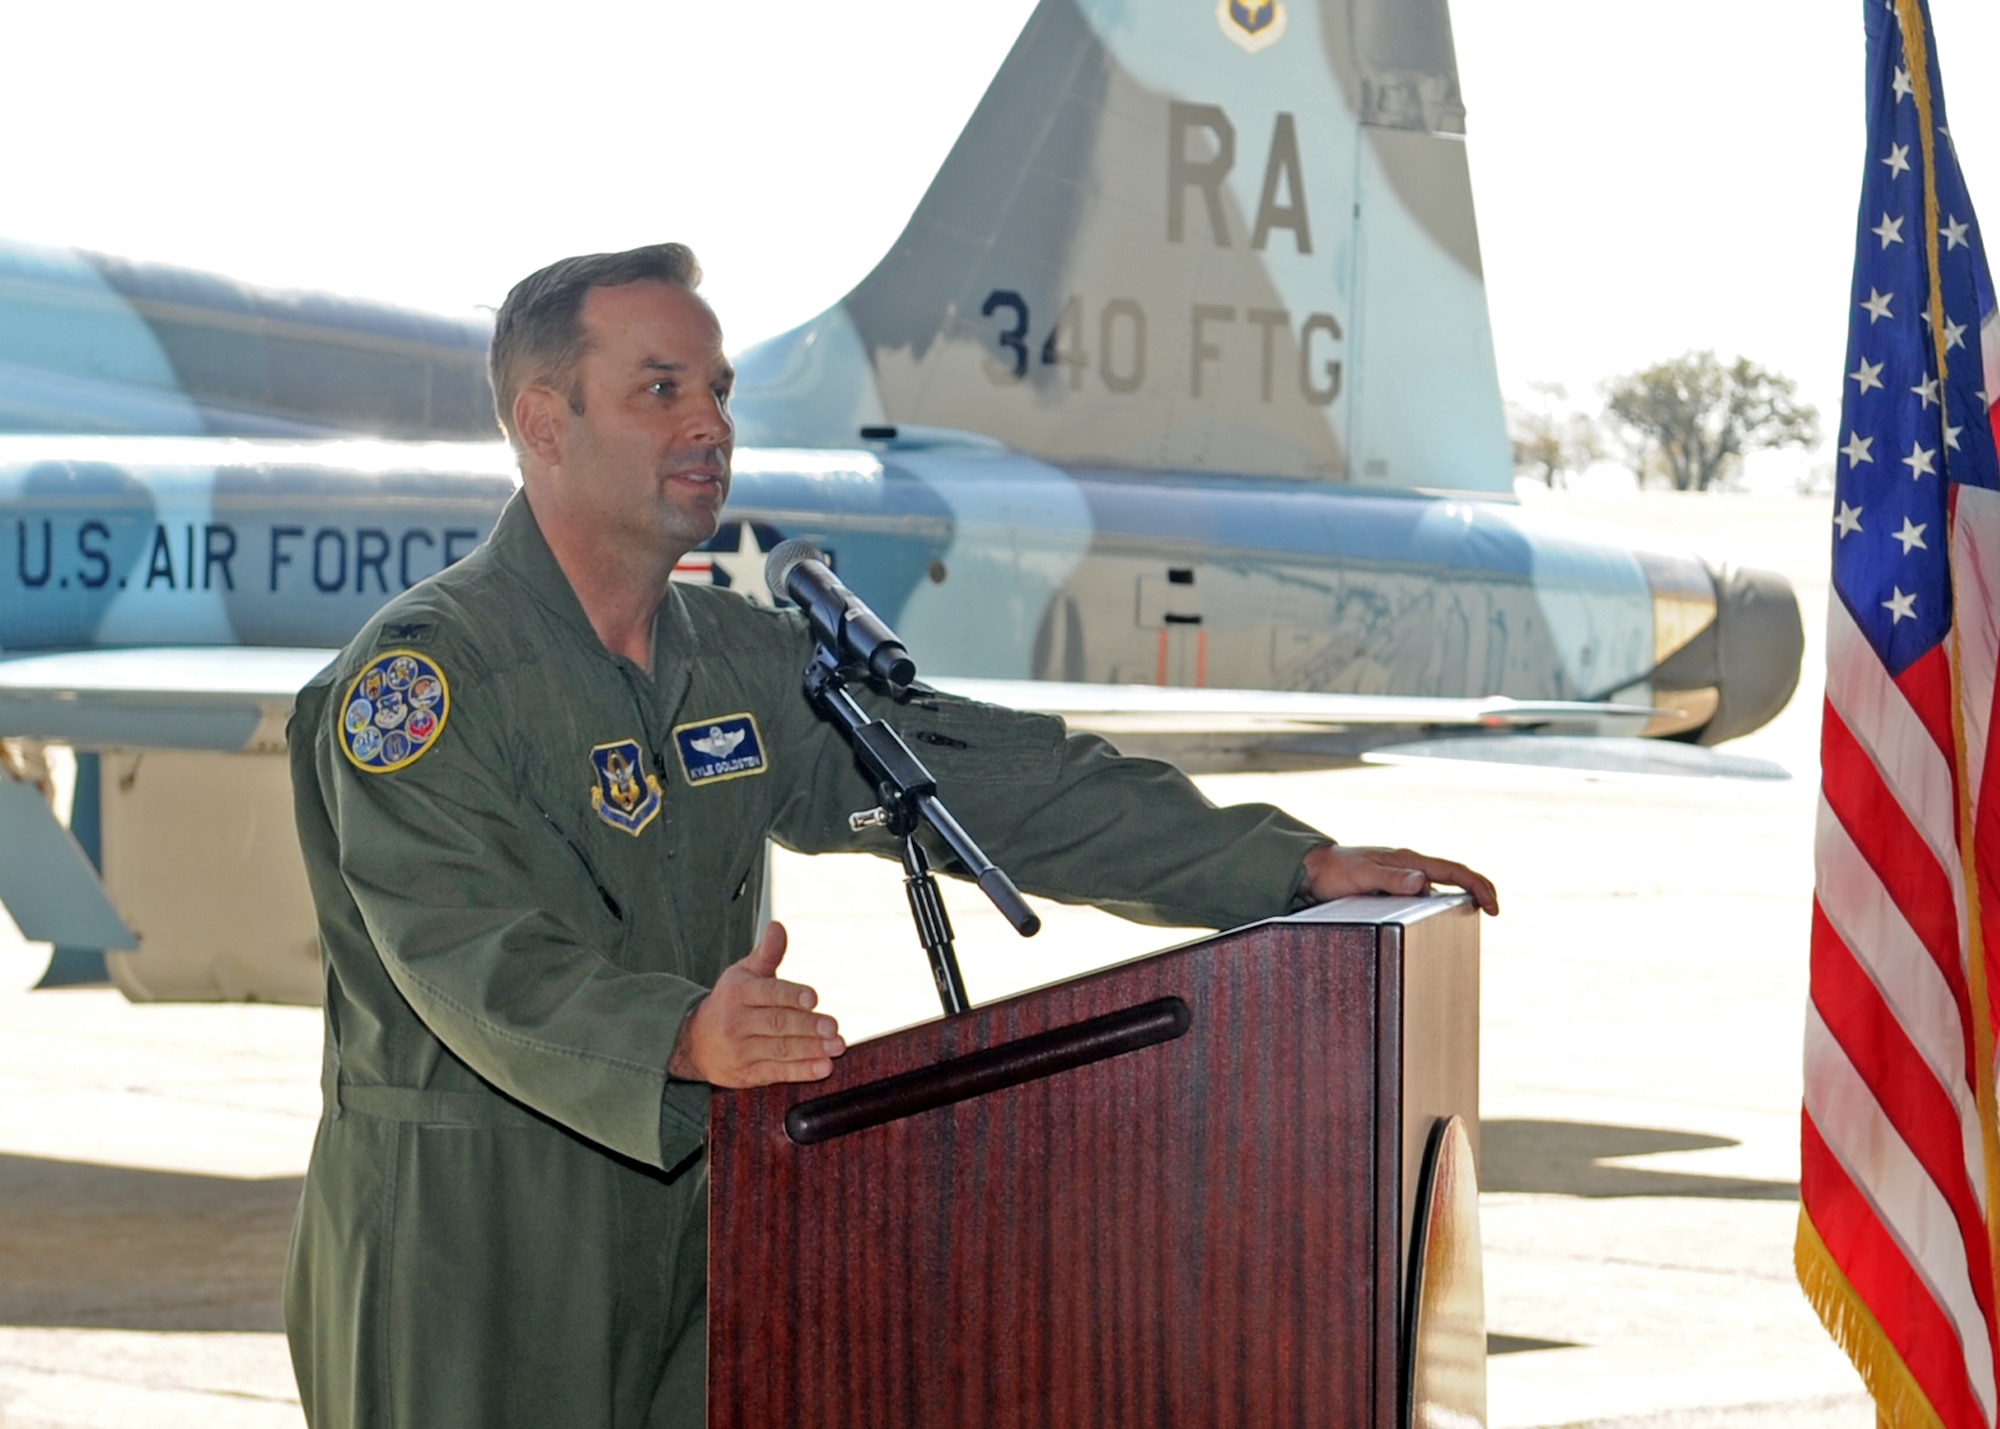 Col. Kyle Goldstein addresses guests, attendees, and personnel after assuming command of the 340th Flying Training Group at Joint Base San Antonio-Randolph, Texas, on March 31, 2022.